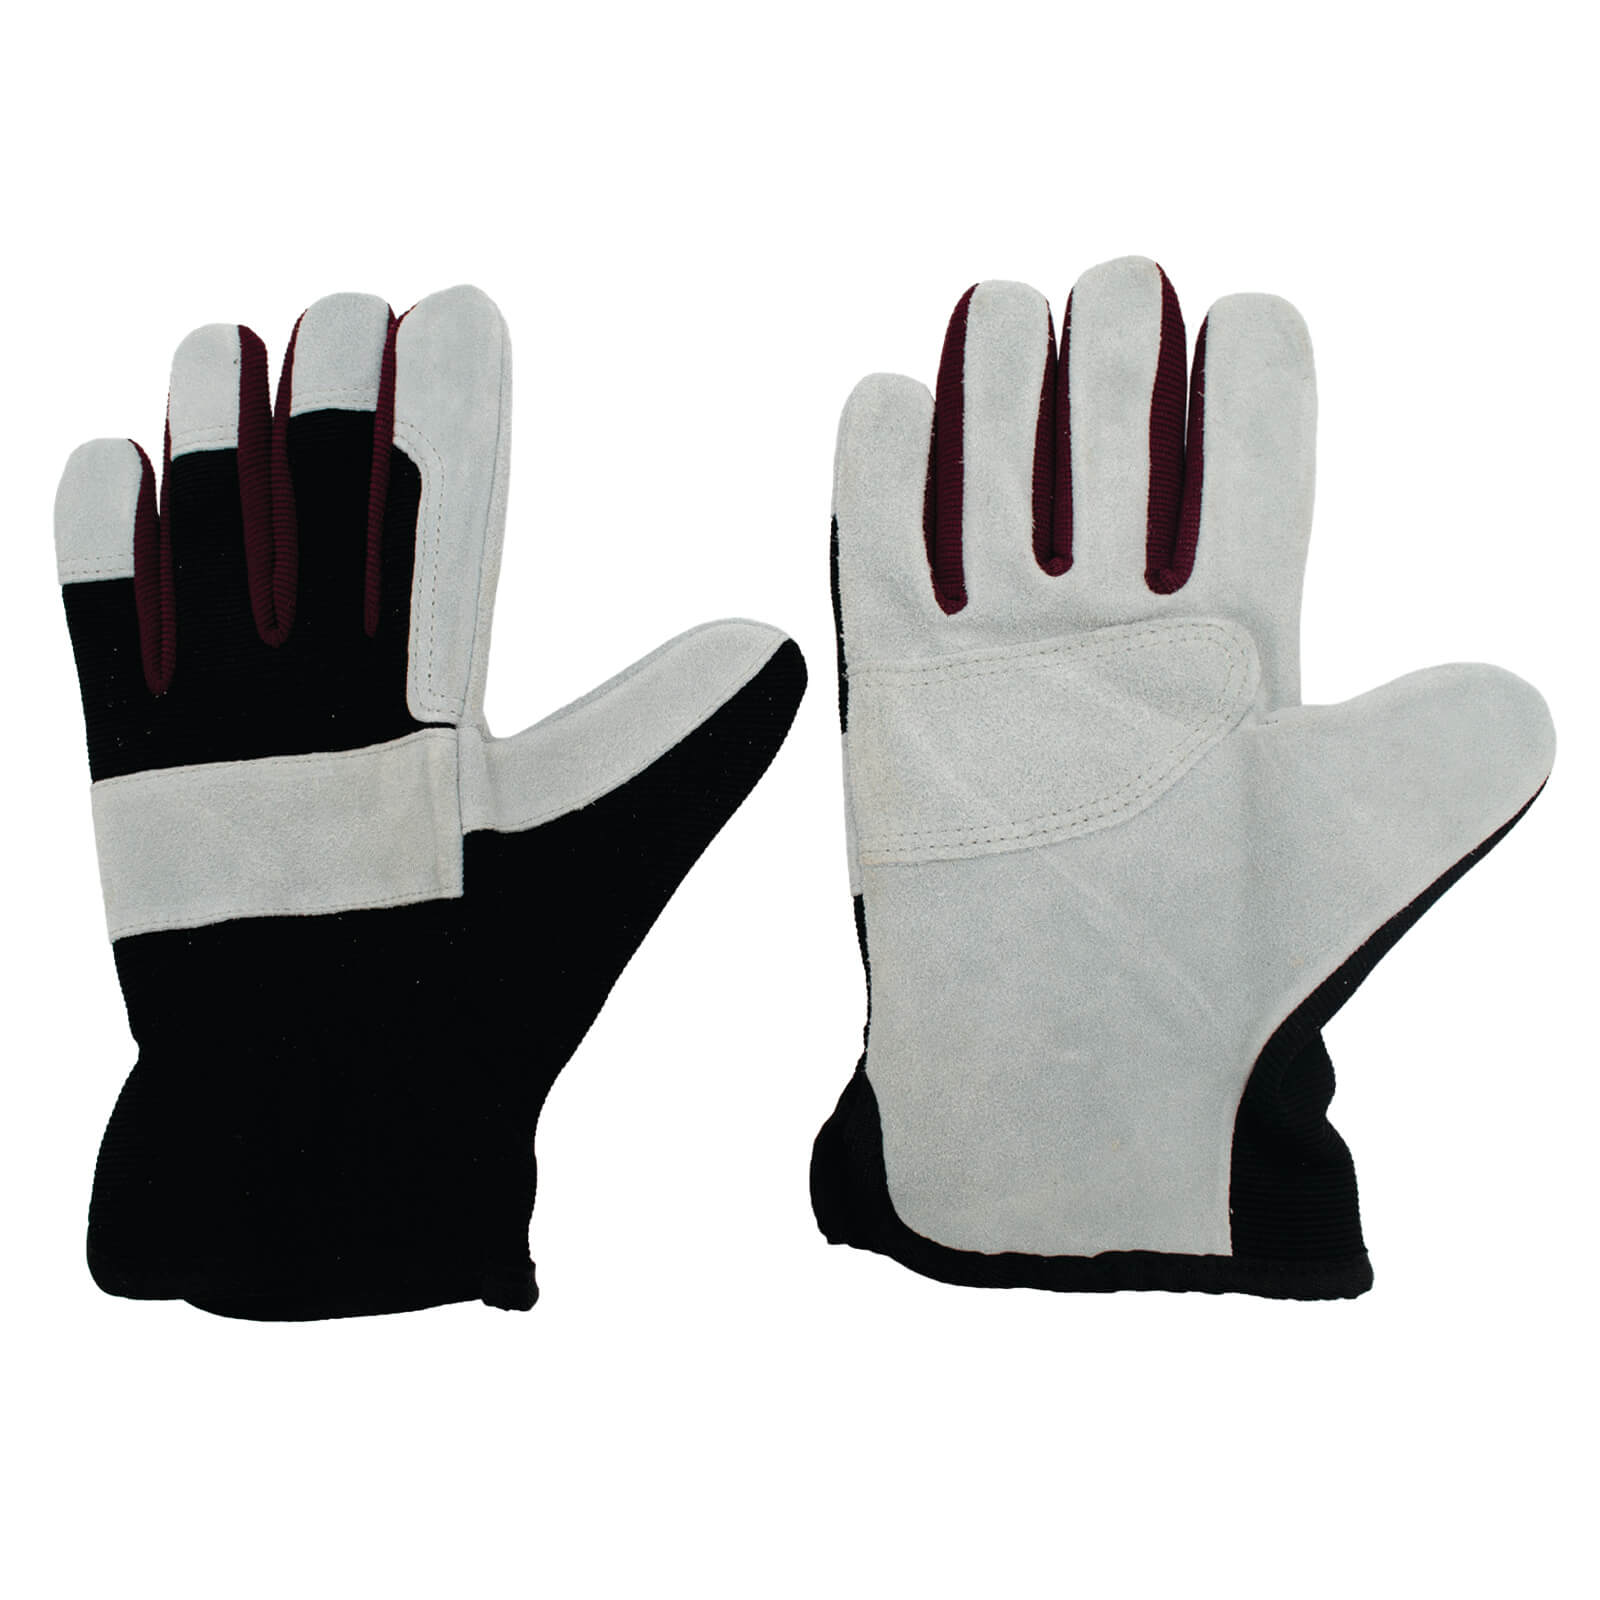 Big Mike by Stonebreaker Leather Palm Sports Gloves - Medium